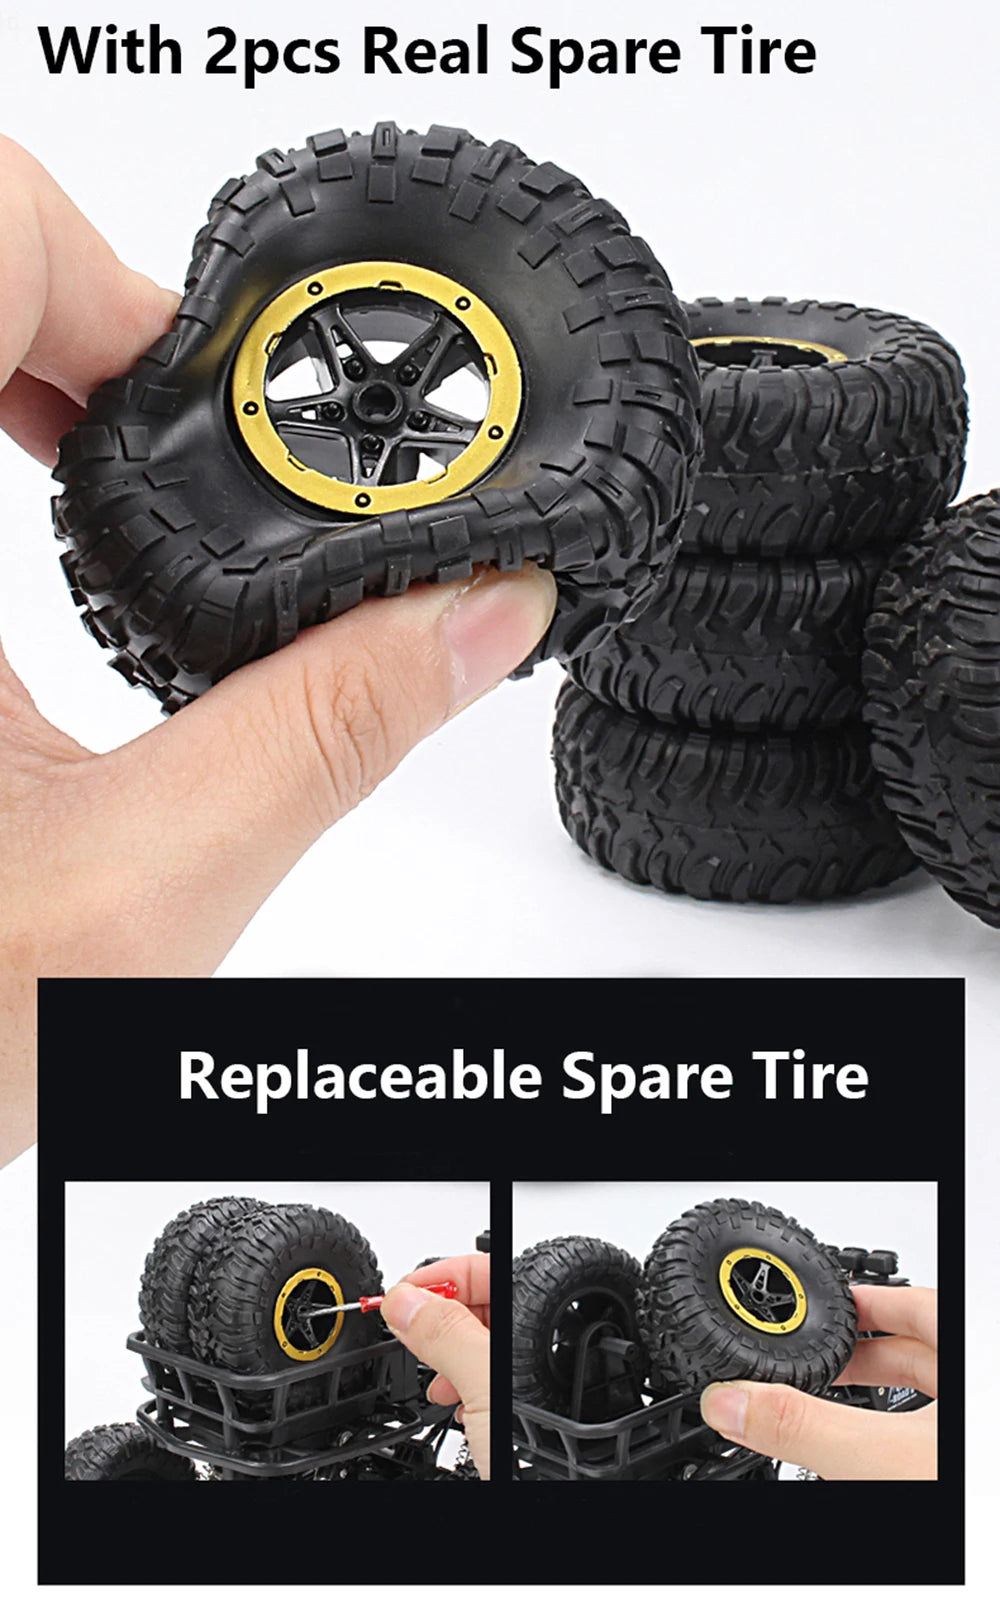 Mit Zpcs Real Spare Tire Replaceable Spare